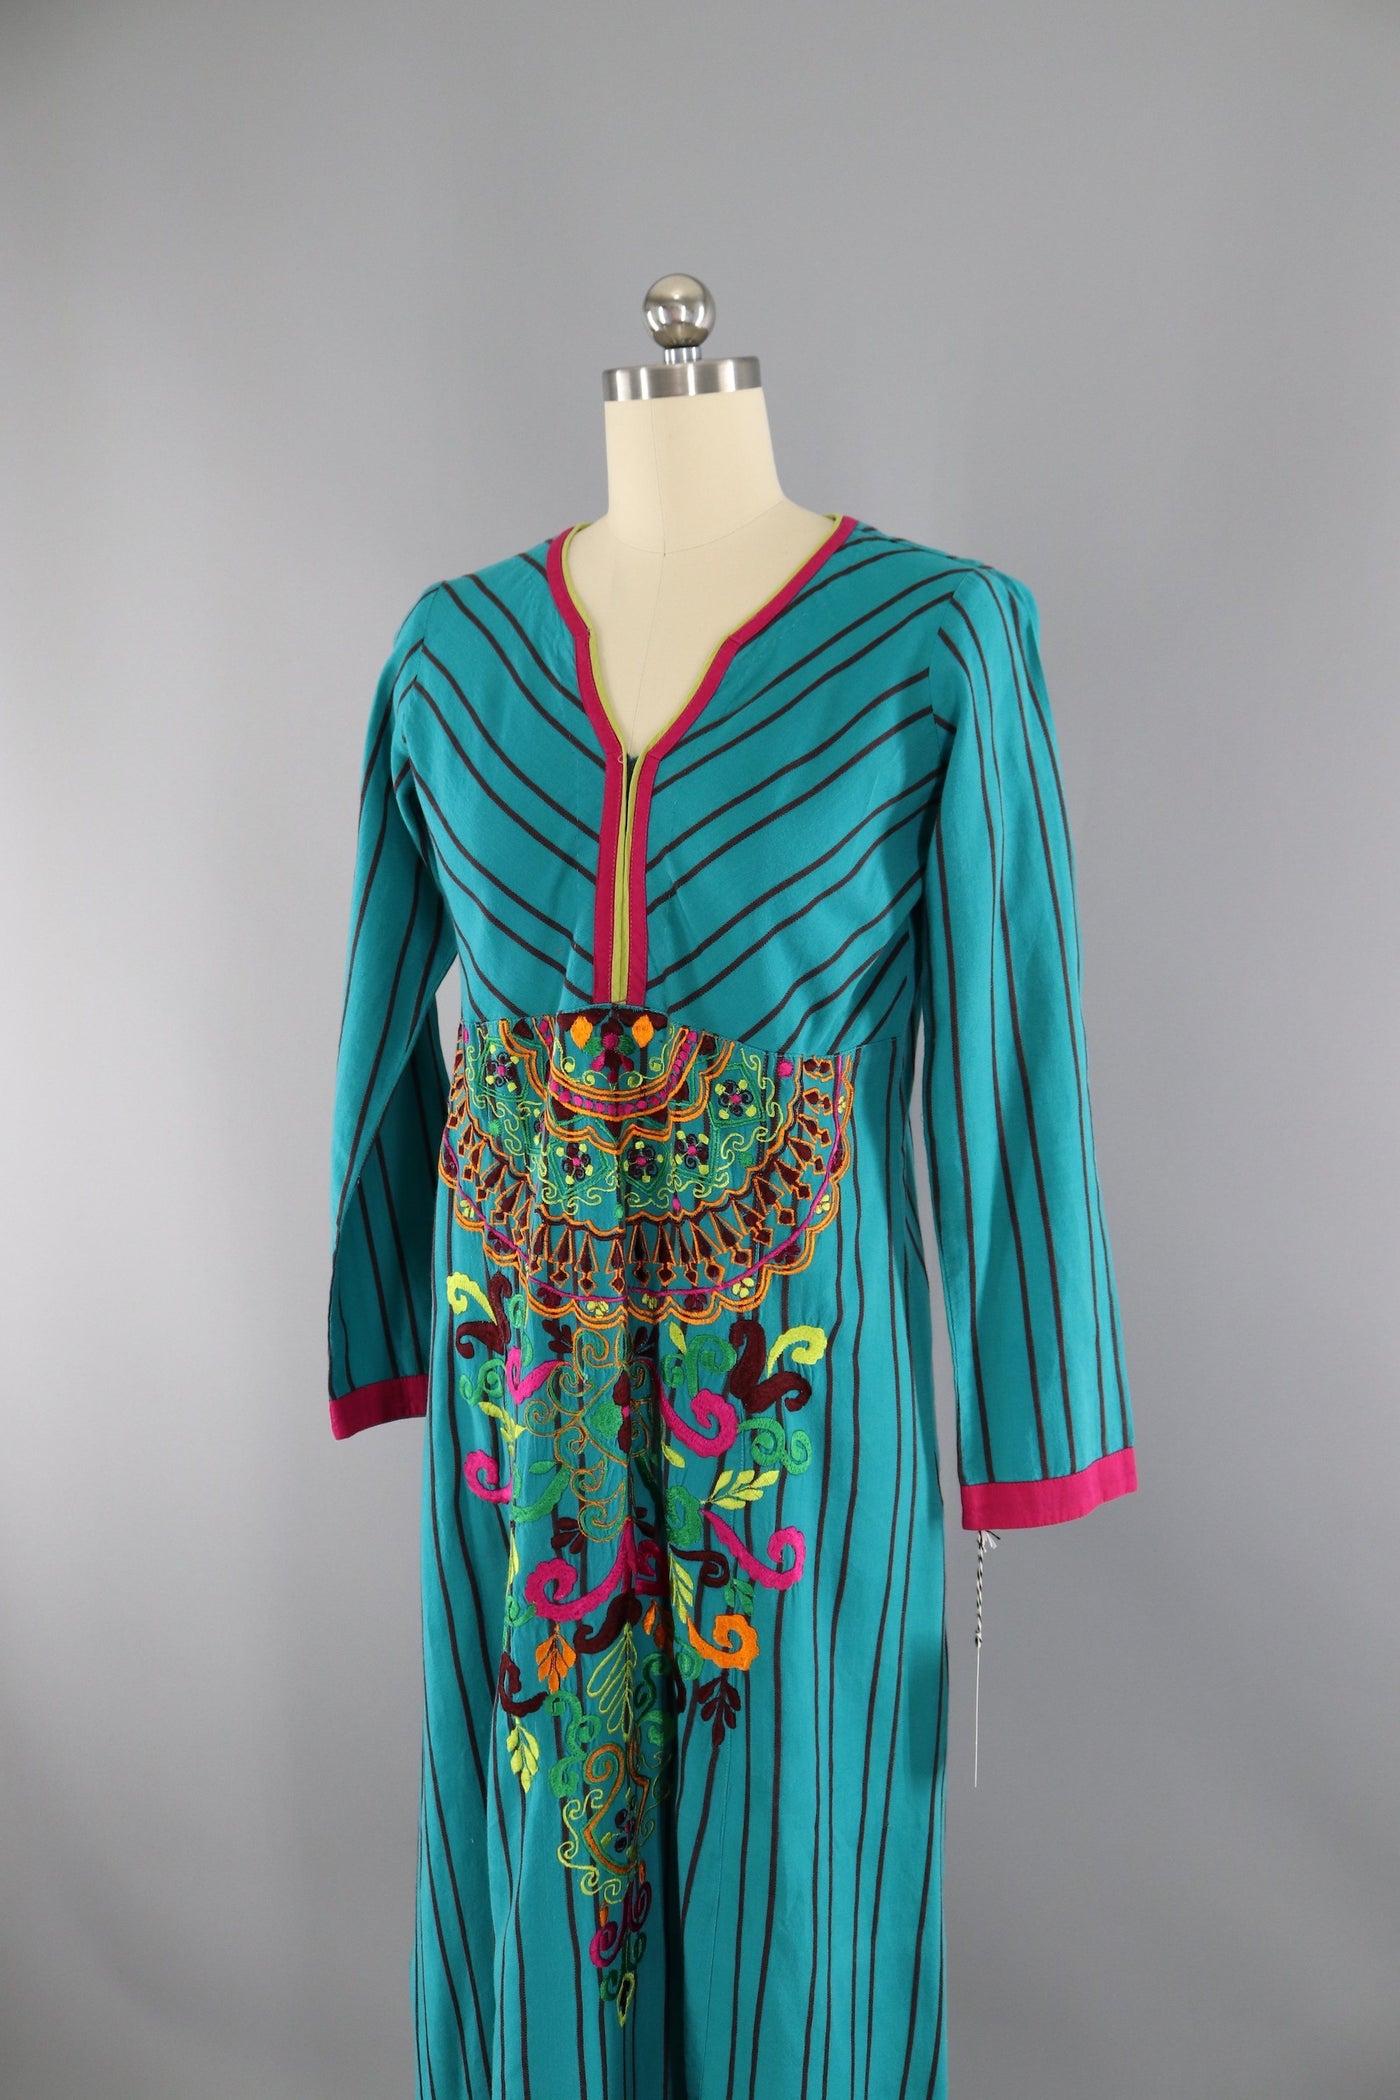 Vintage 1970s Mexican Embroidered Dress / Turquoise Blue - ThisBlueBird